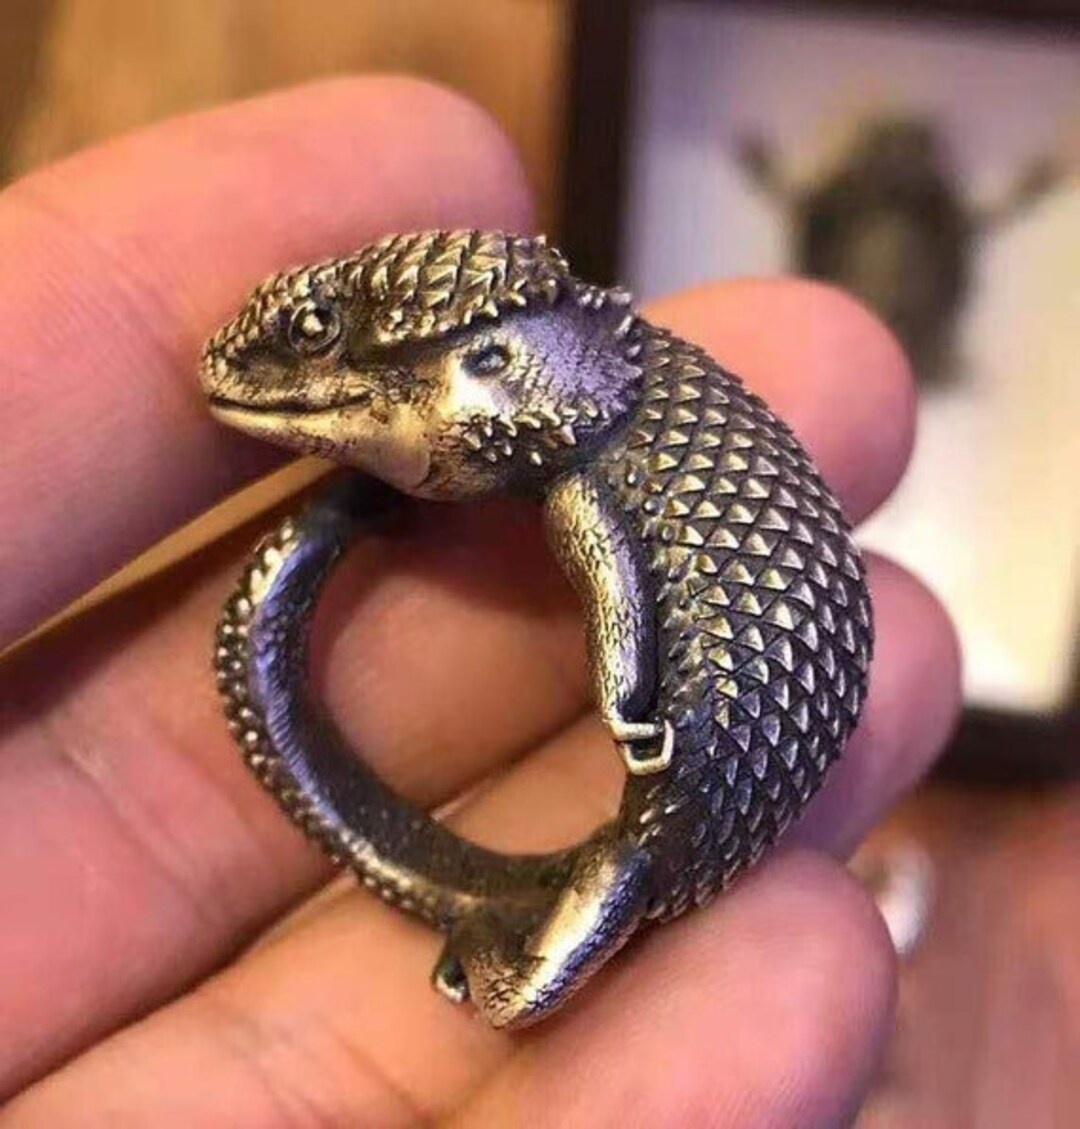 Beardies Eyes Bearded Ring Jewelry Gold Favourite Handcrafted Bearded Ring Dragon Ring Pet My Dragon Etsy Lover Jewelry Reptile 24K -